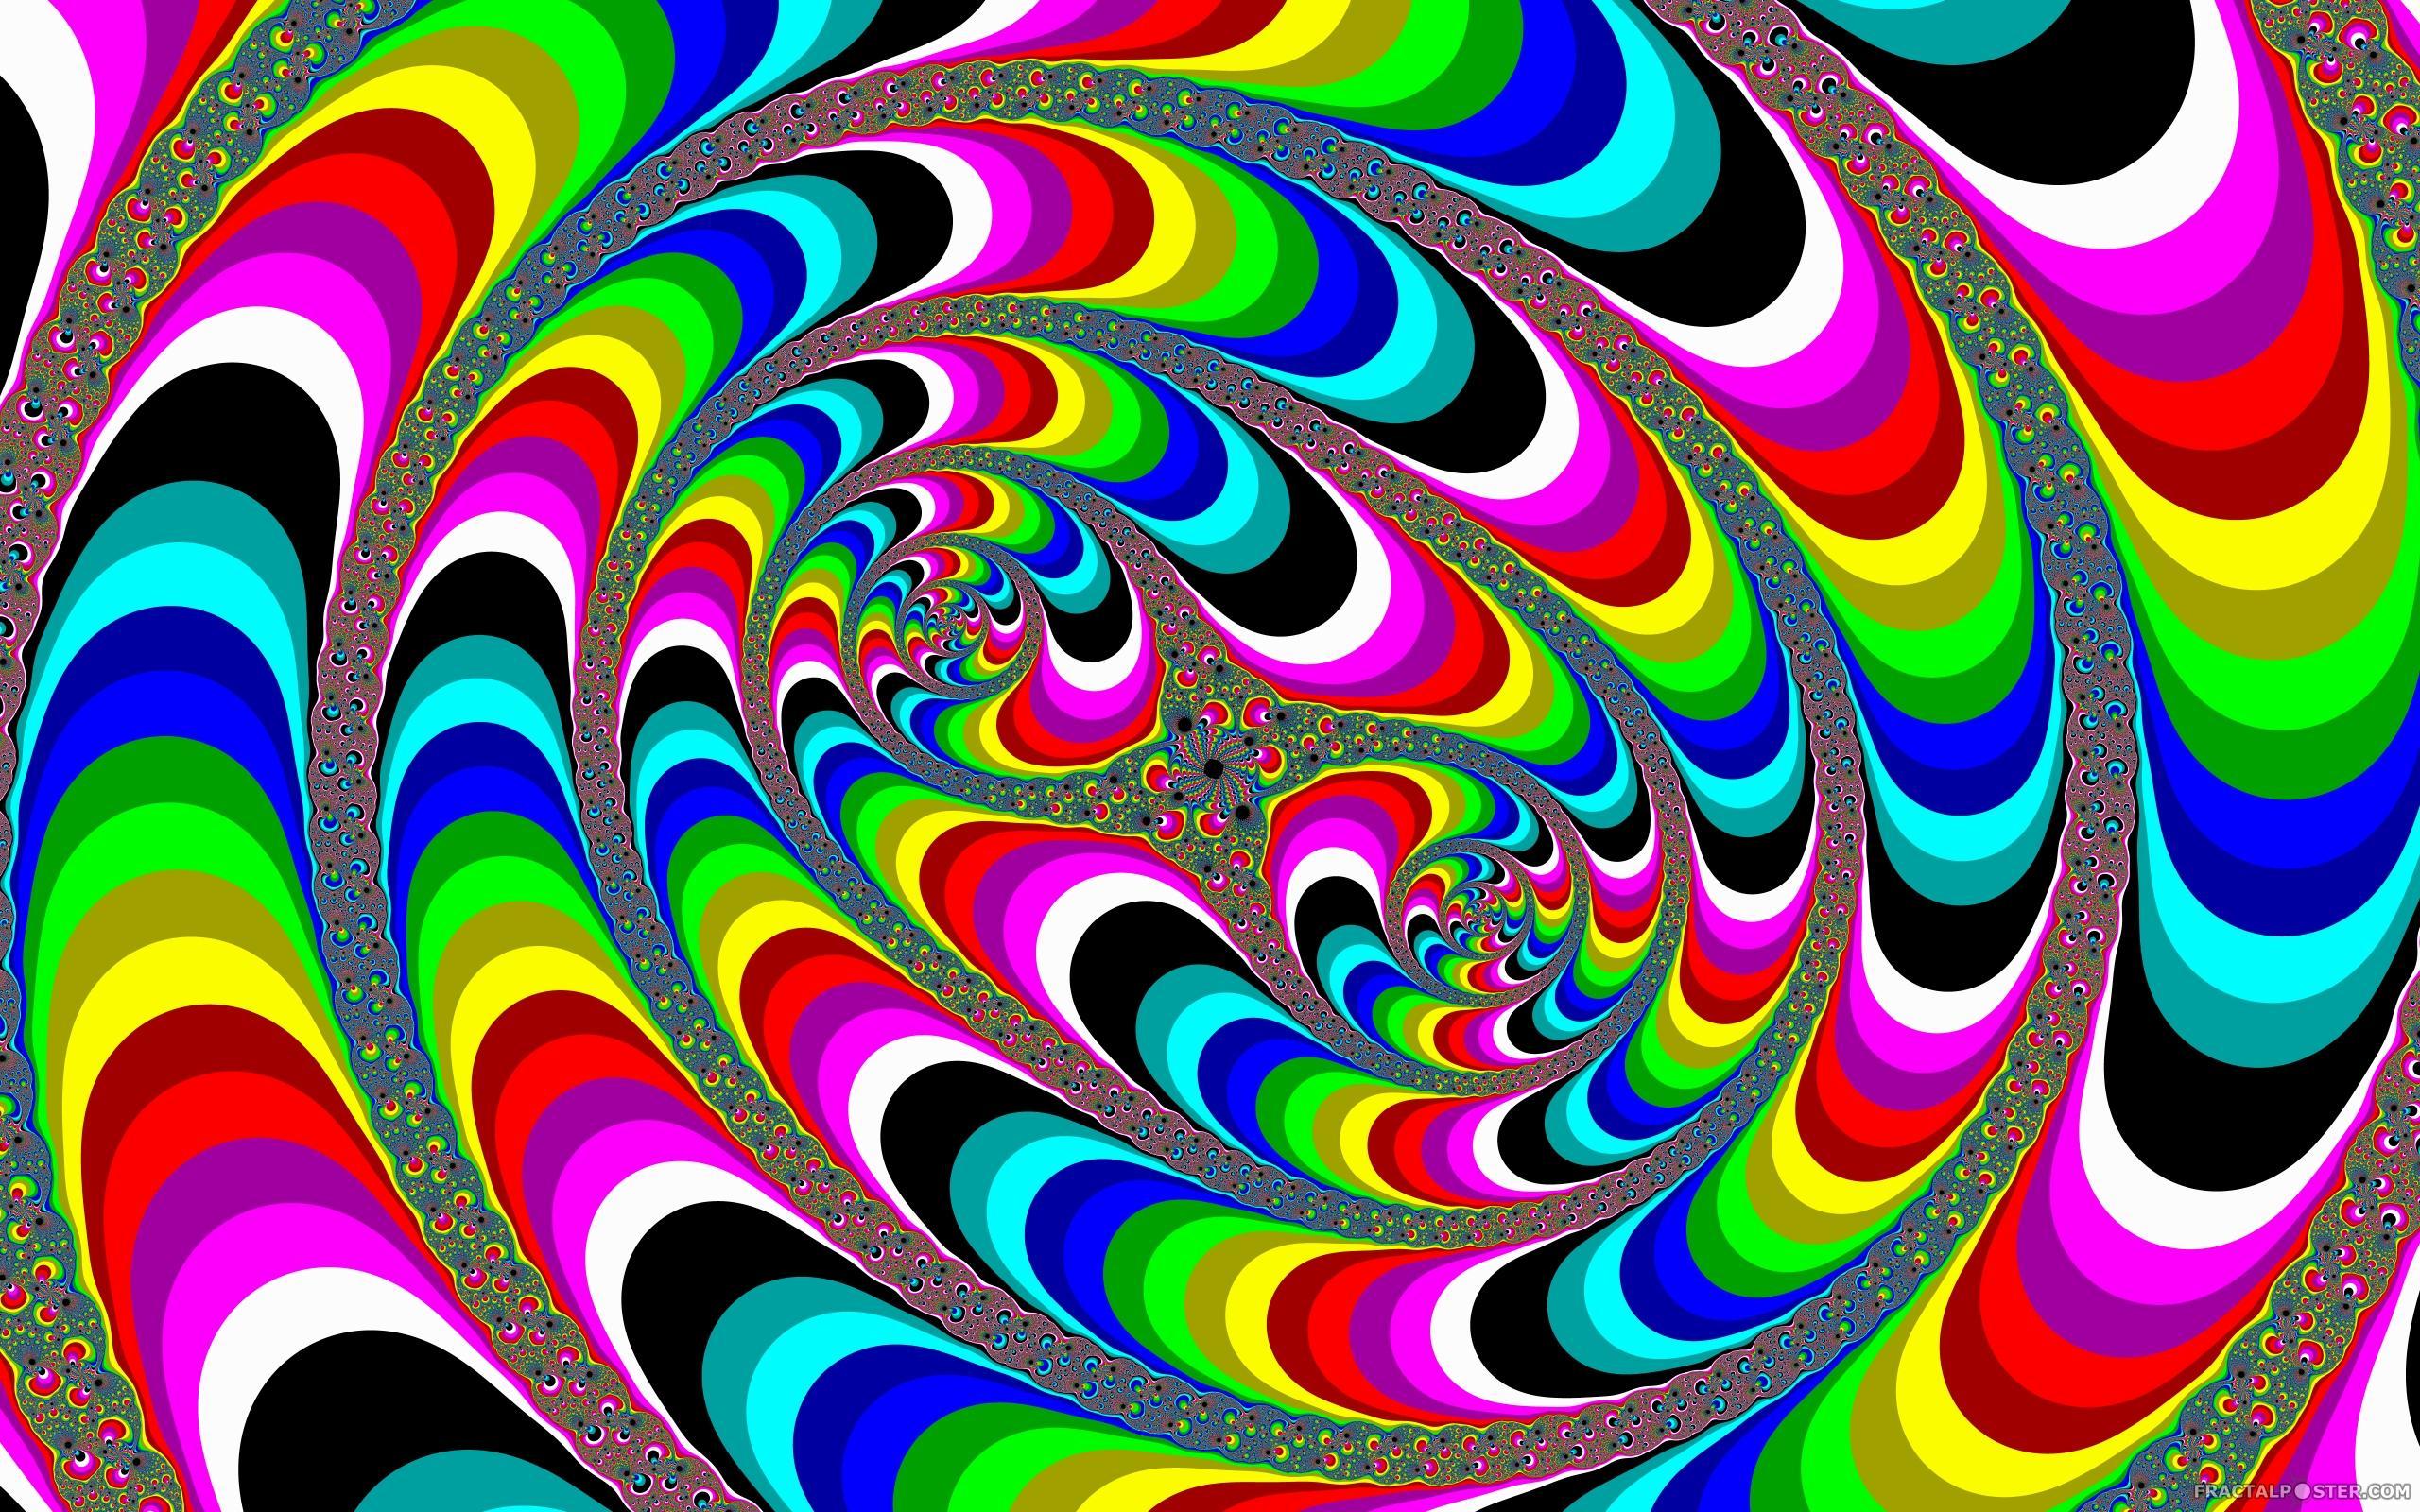 Psychedelic fractal image by Teleavenger. HD Wallpaper, posters